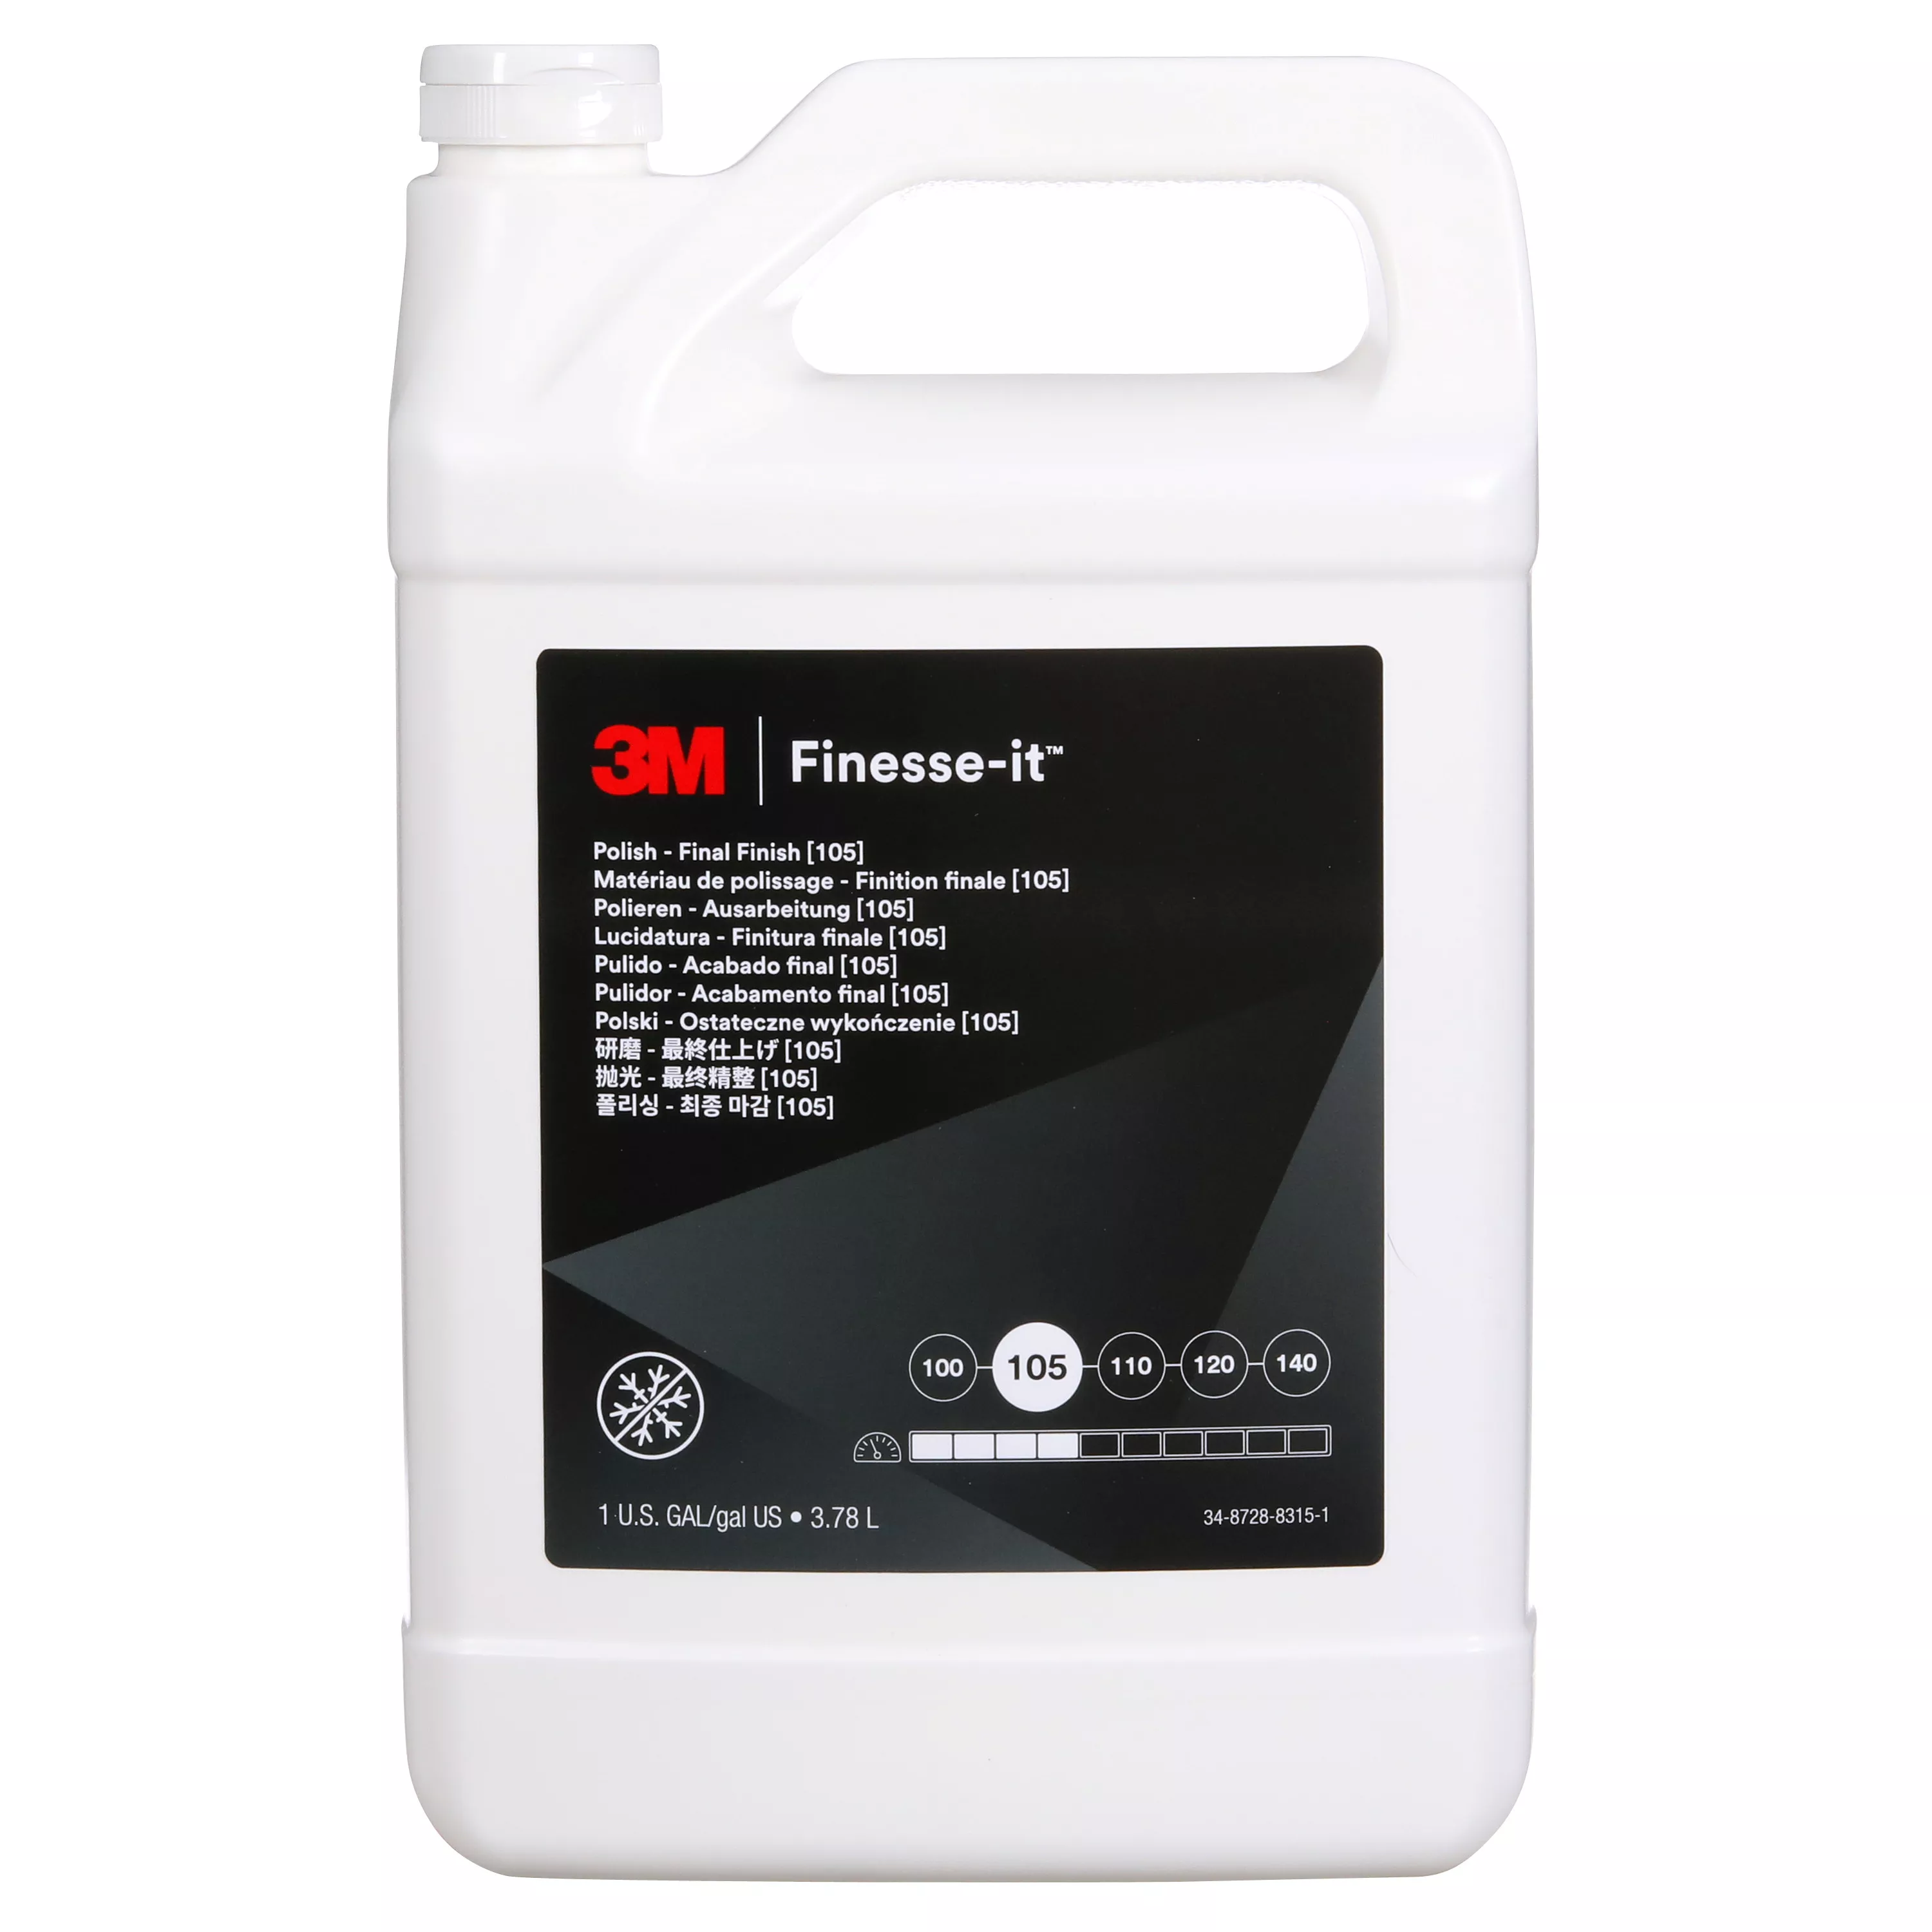 3M™ Finesse-it™ Polish Standard Series, 82878, Final Finish (105), Gray,
Easy Clean Up, 3.785 Liter (1 US Gallon), 4 ea/Case